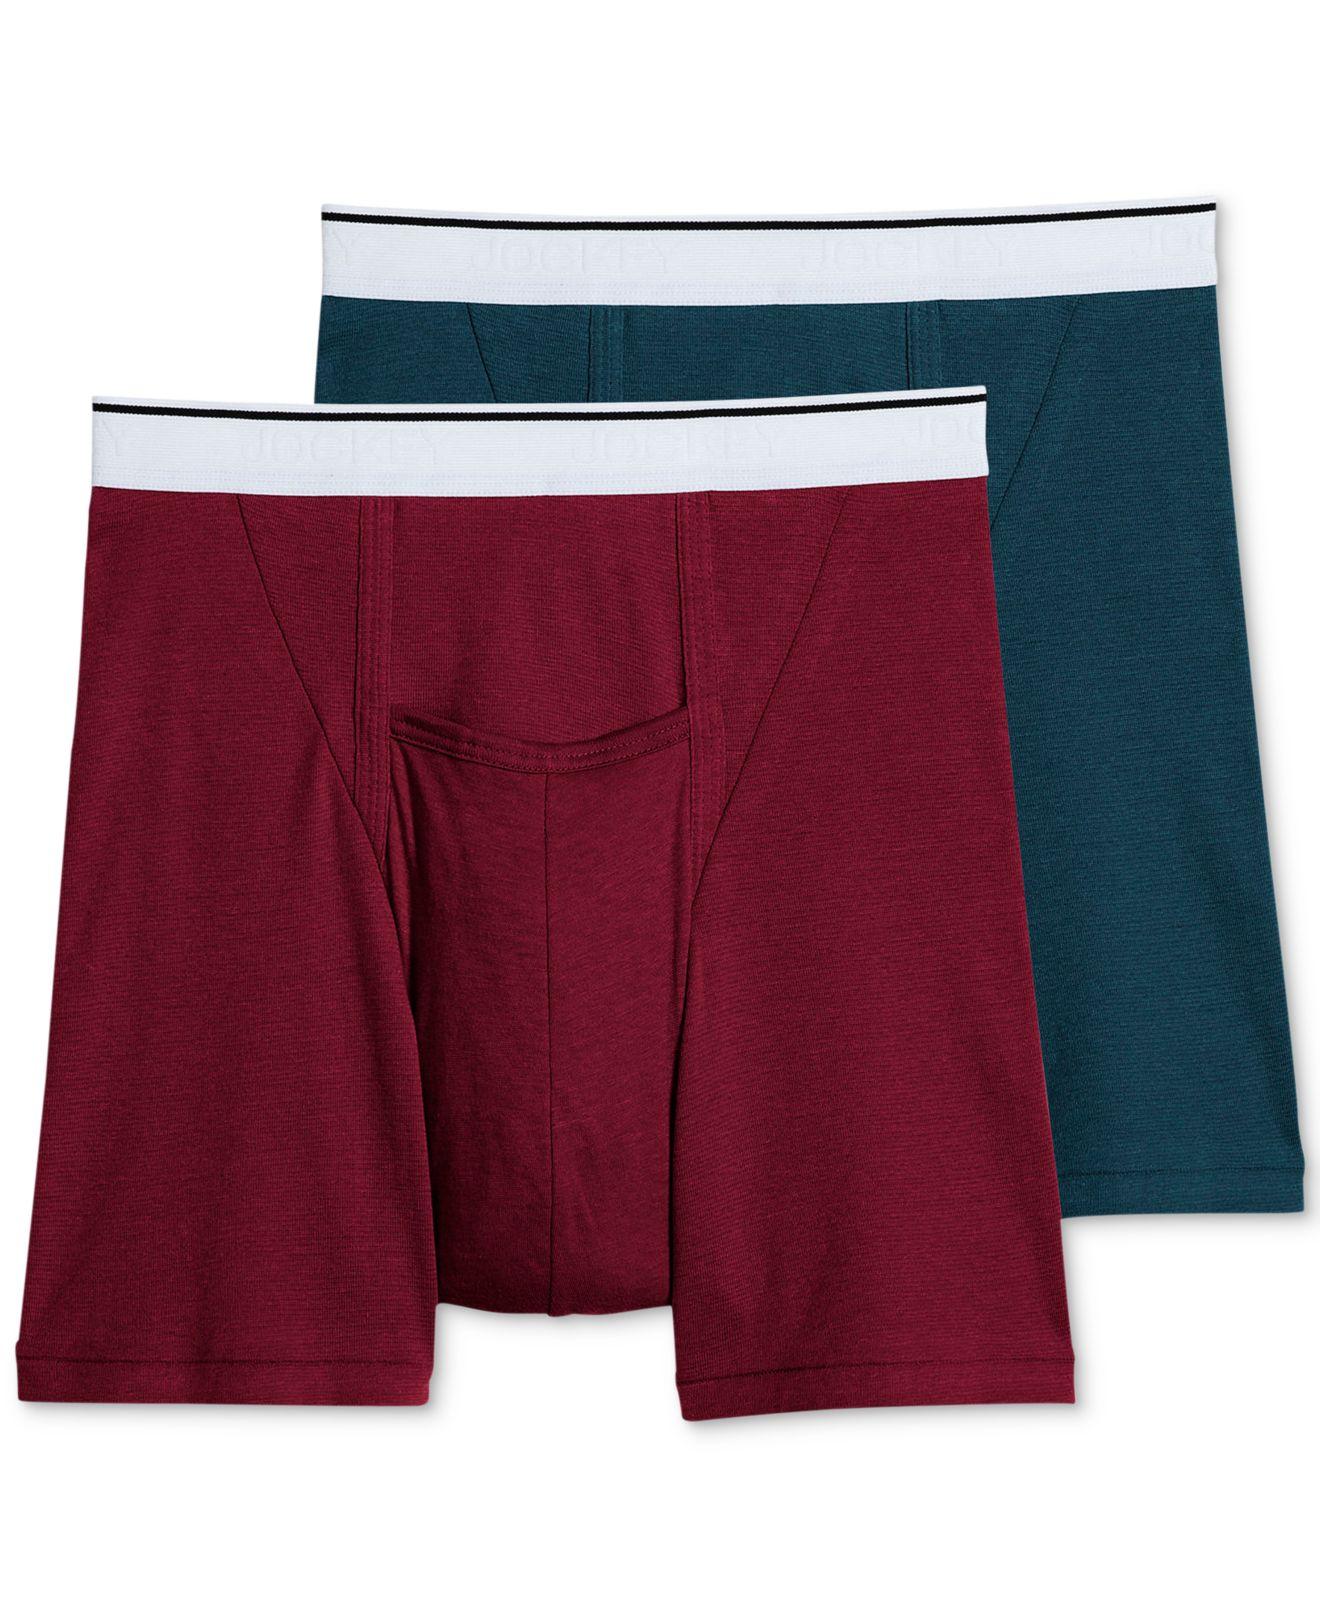 Jockey Pouch Boxer Briefs 2-pack in Red for Men - Lyst